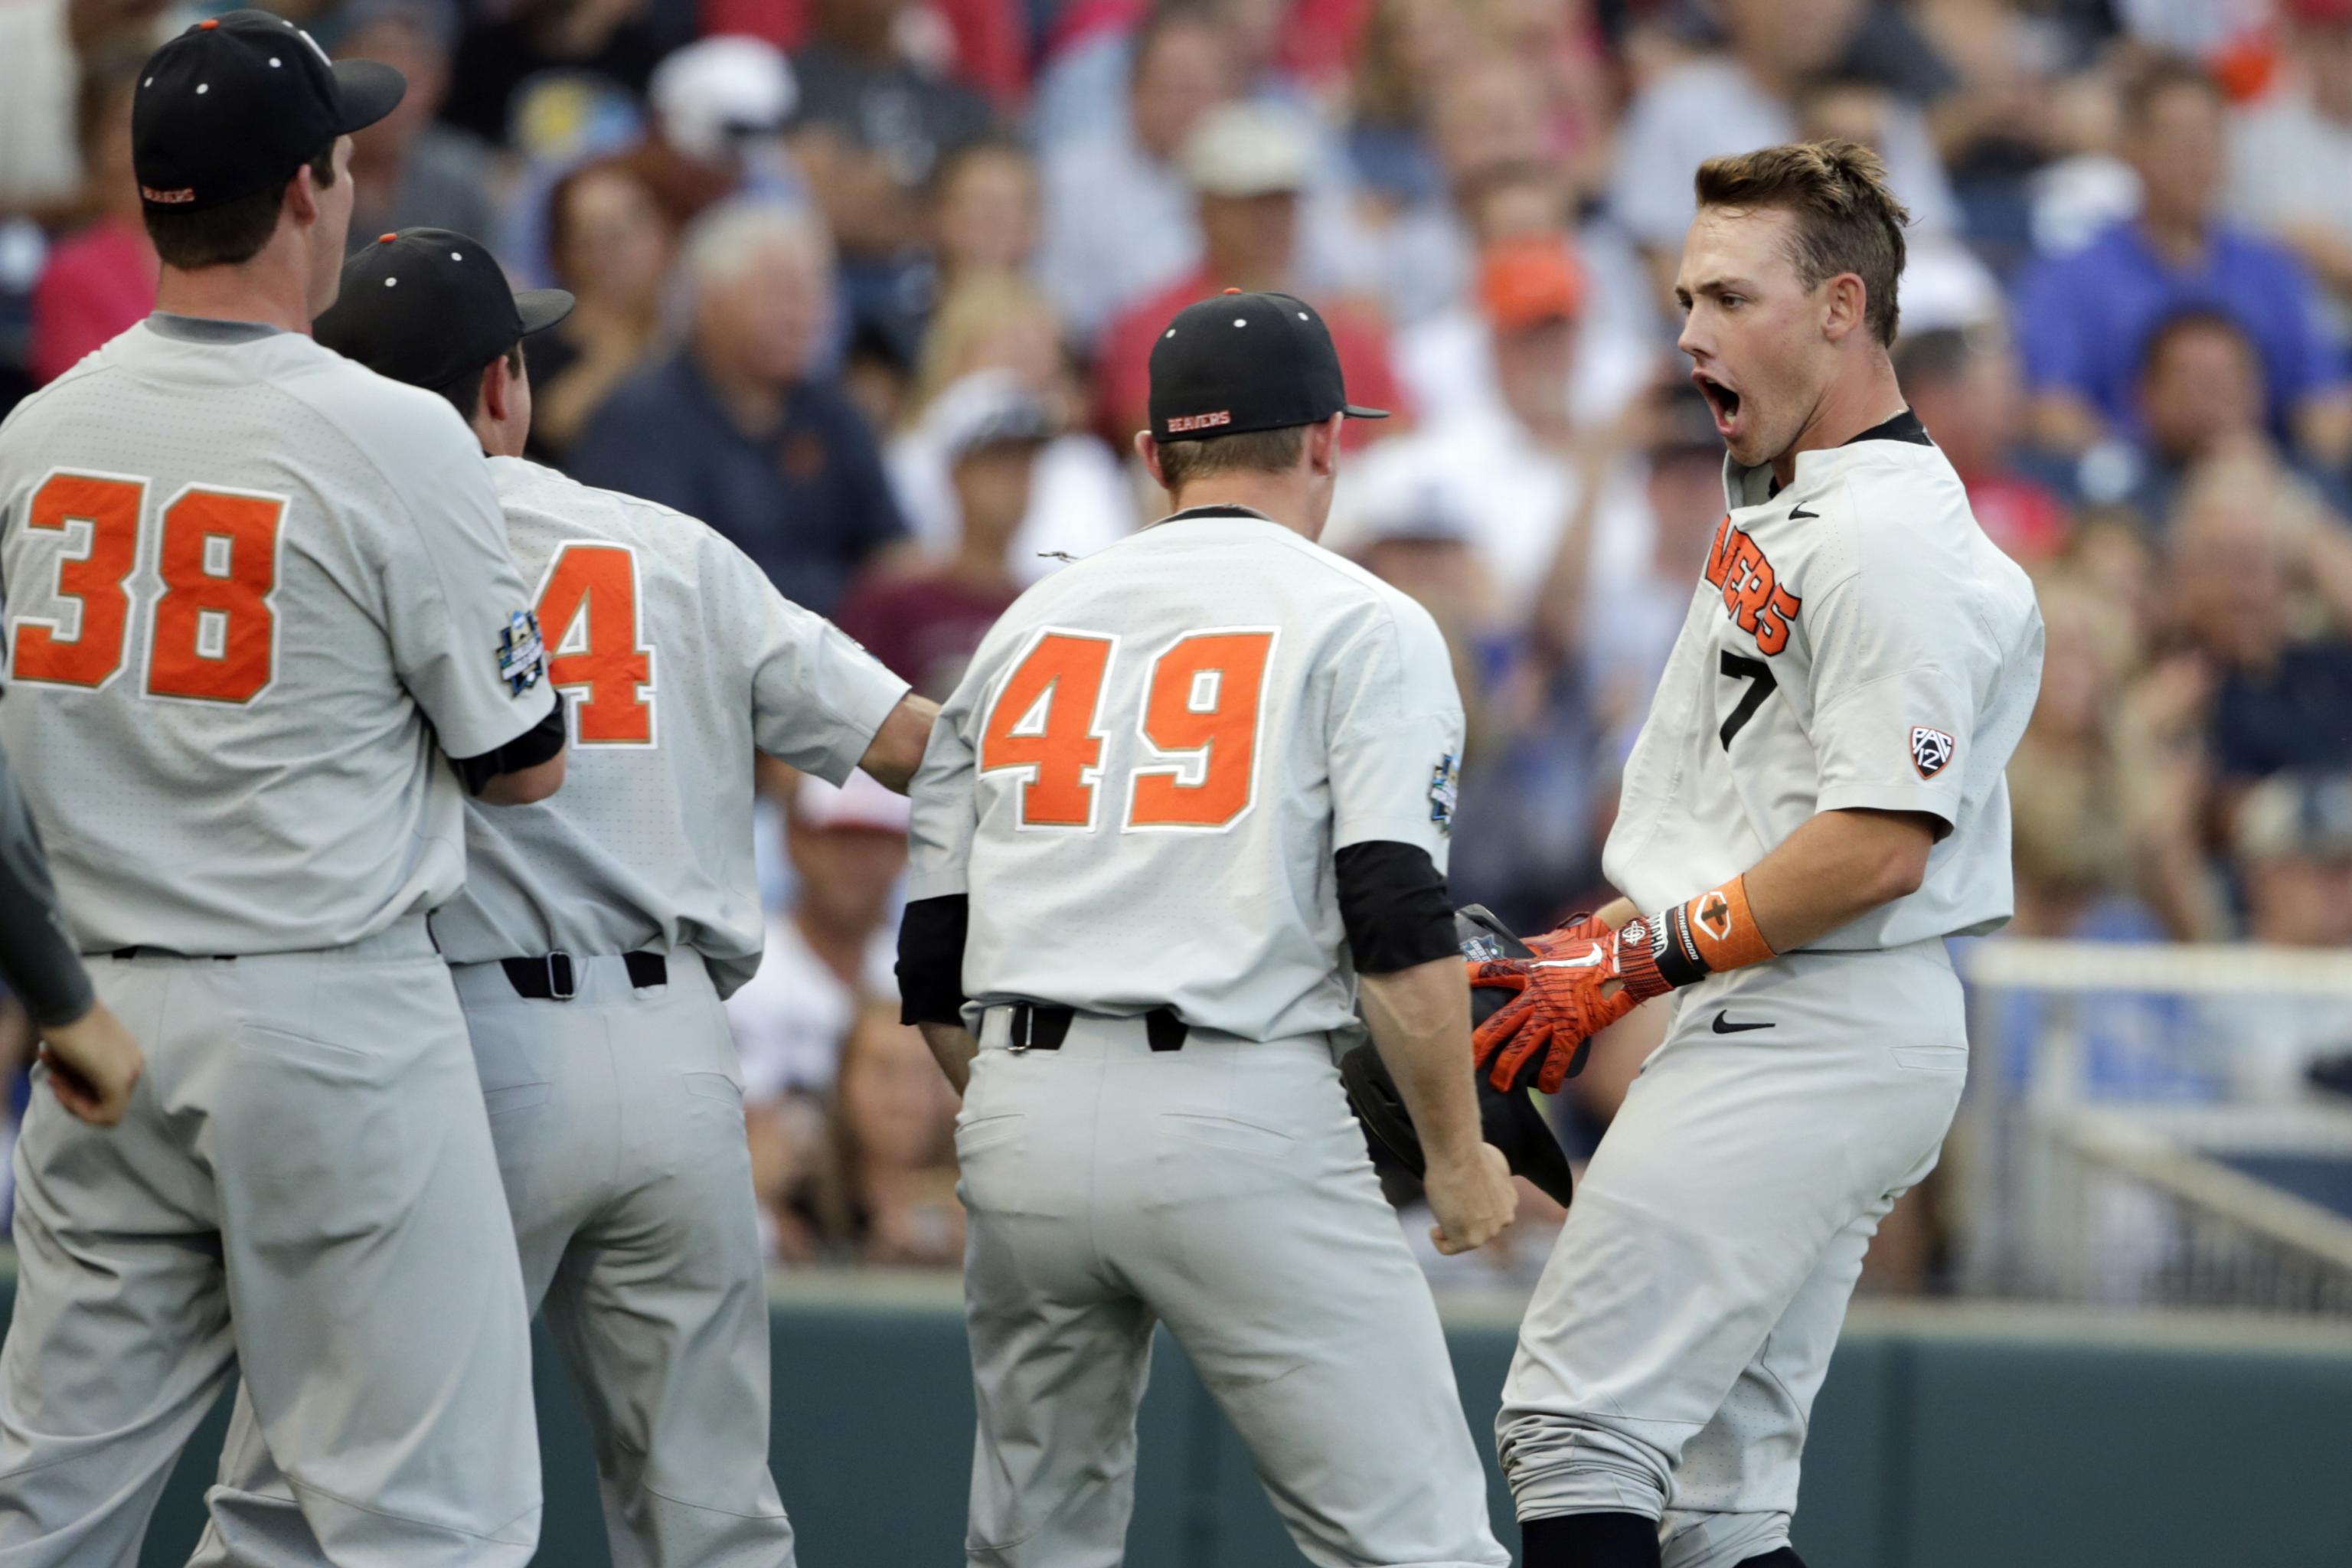 Oregon State is headed to their first CWS finals since 2007